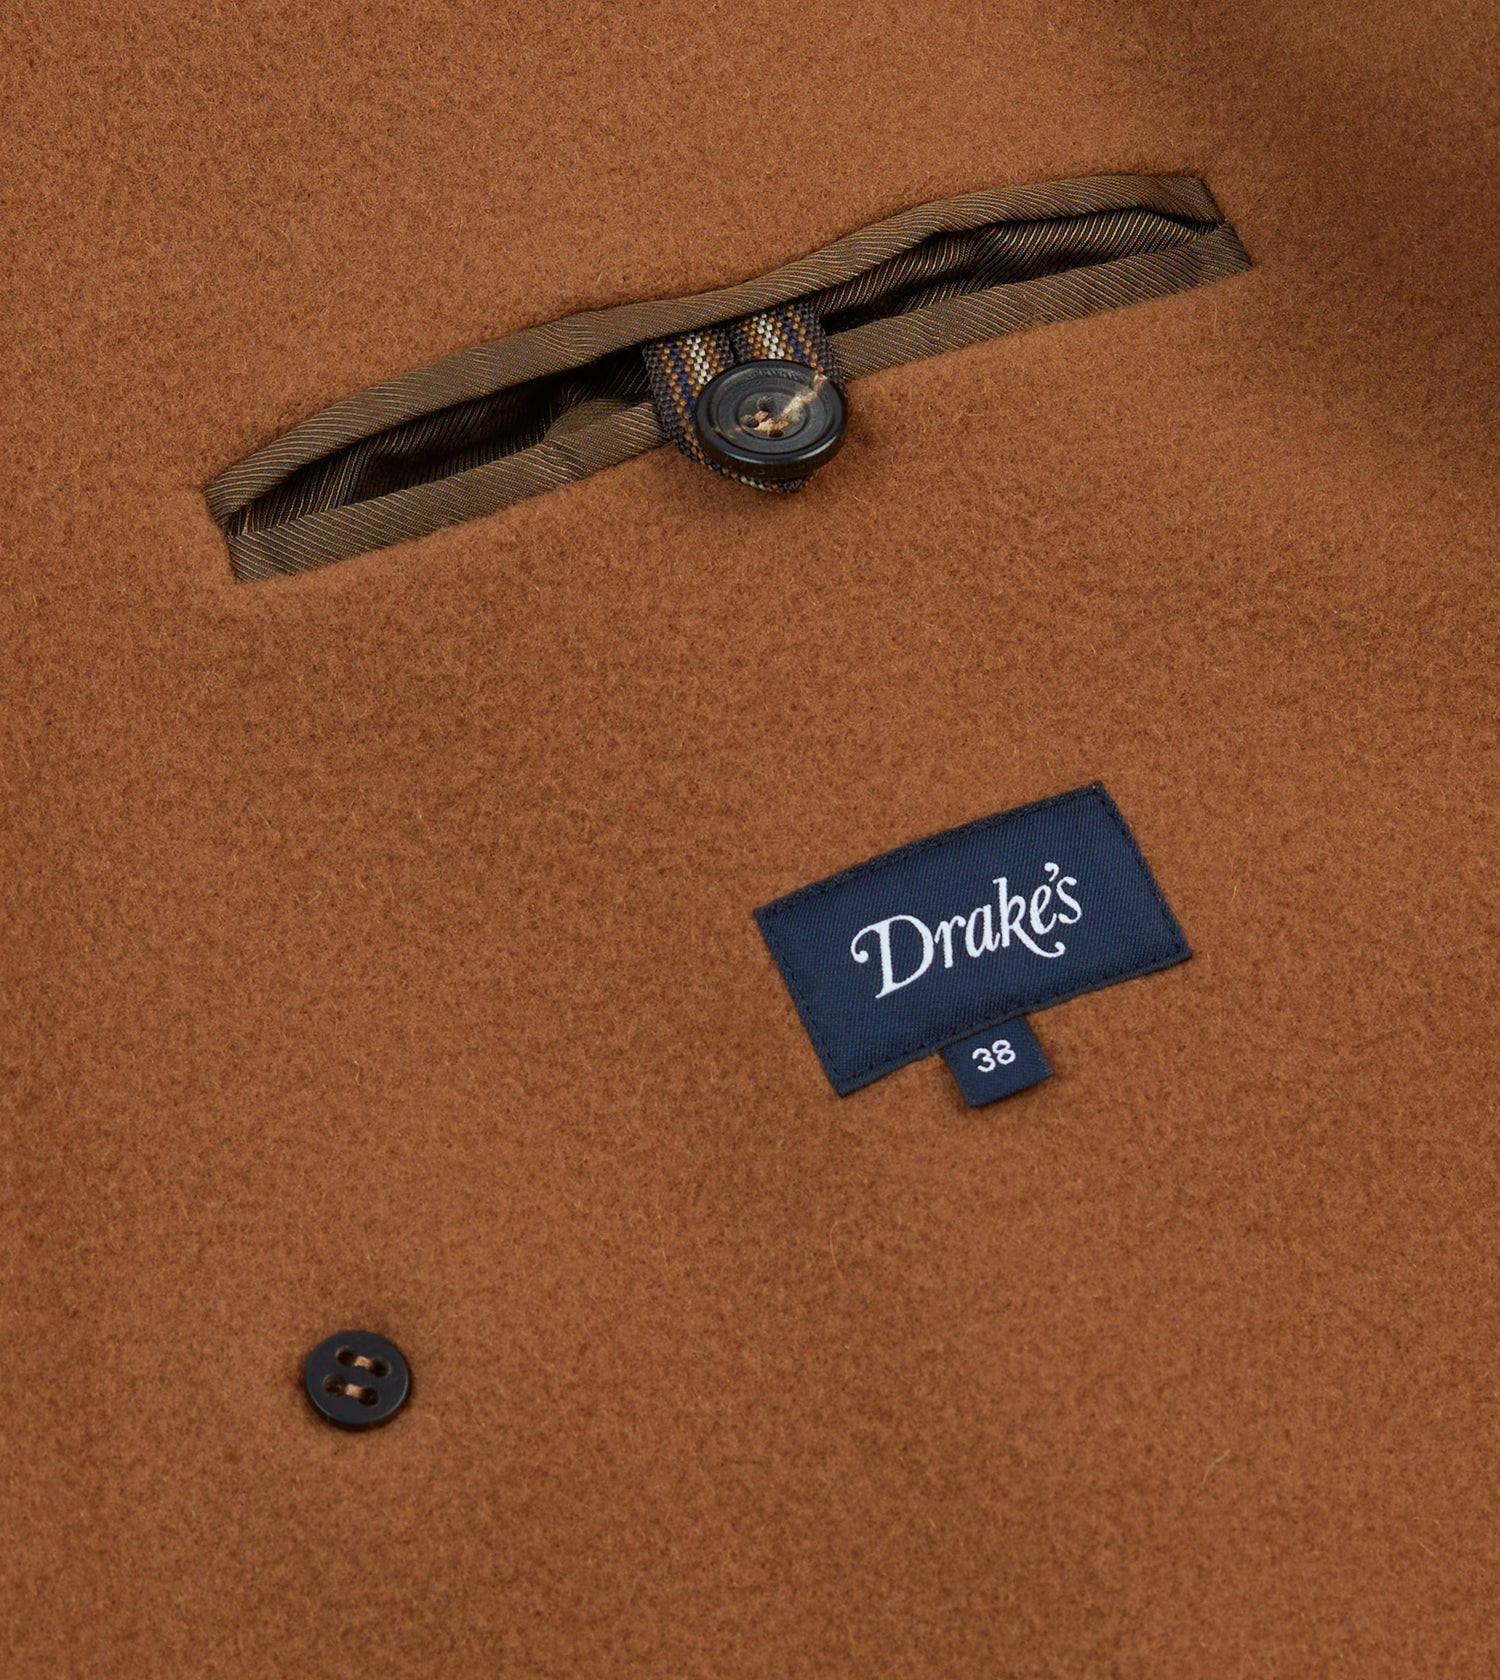 Camel Double-Breasted Cashmere-Wool Overcoat